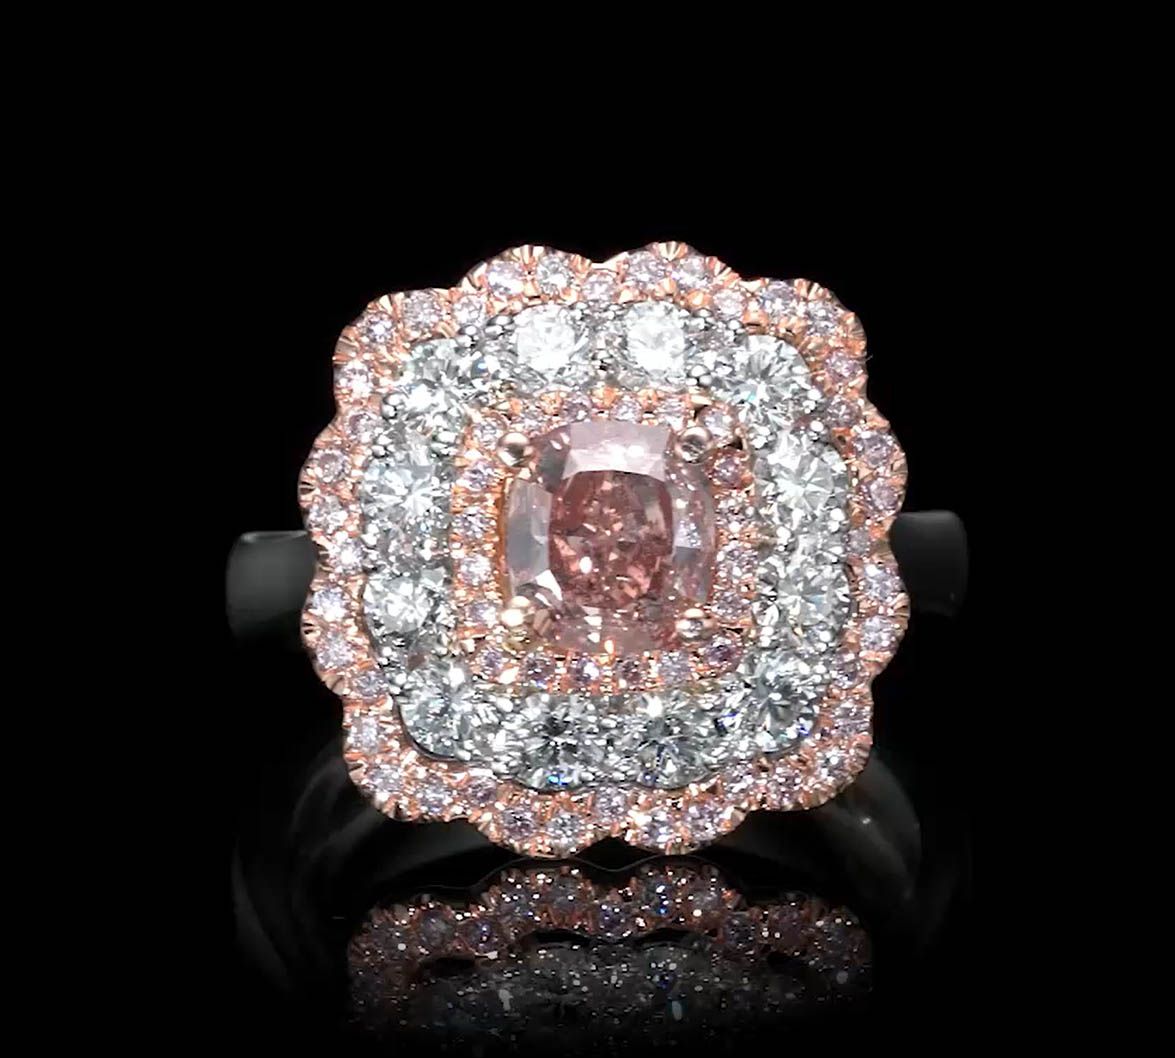 Ring with 1.00ct Fancy Brown-Pink, 1.36ct Small White and Pink Diamonds